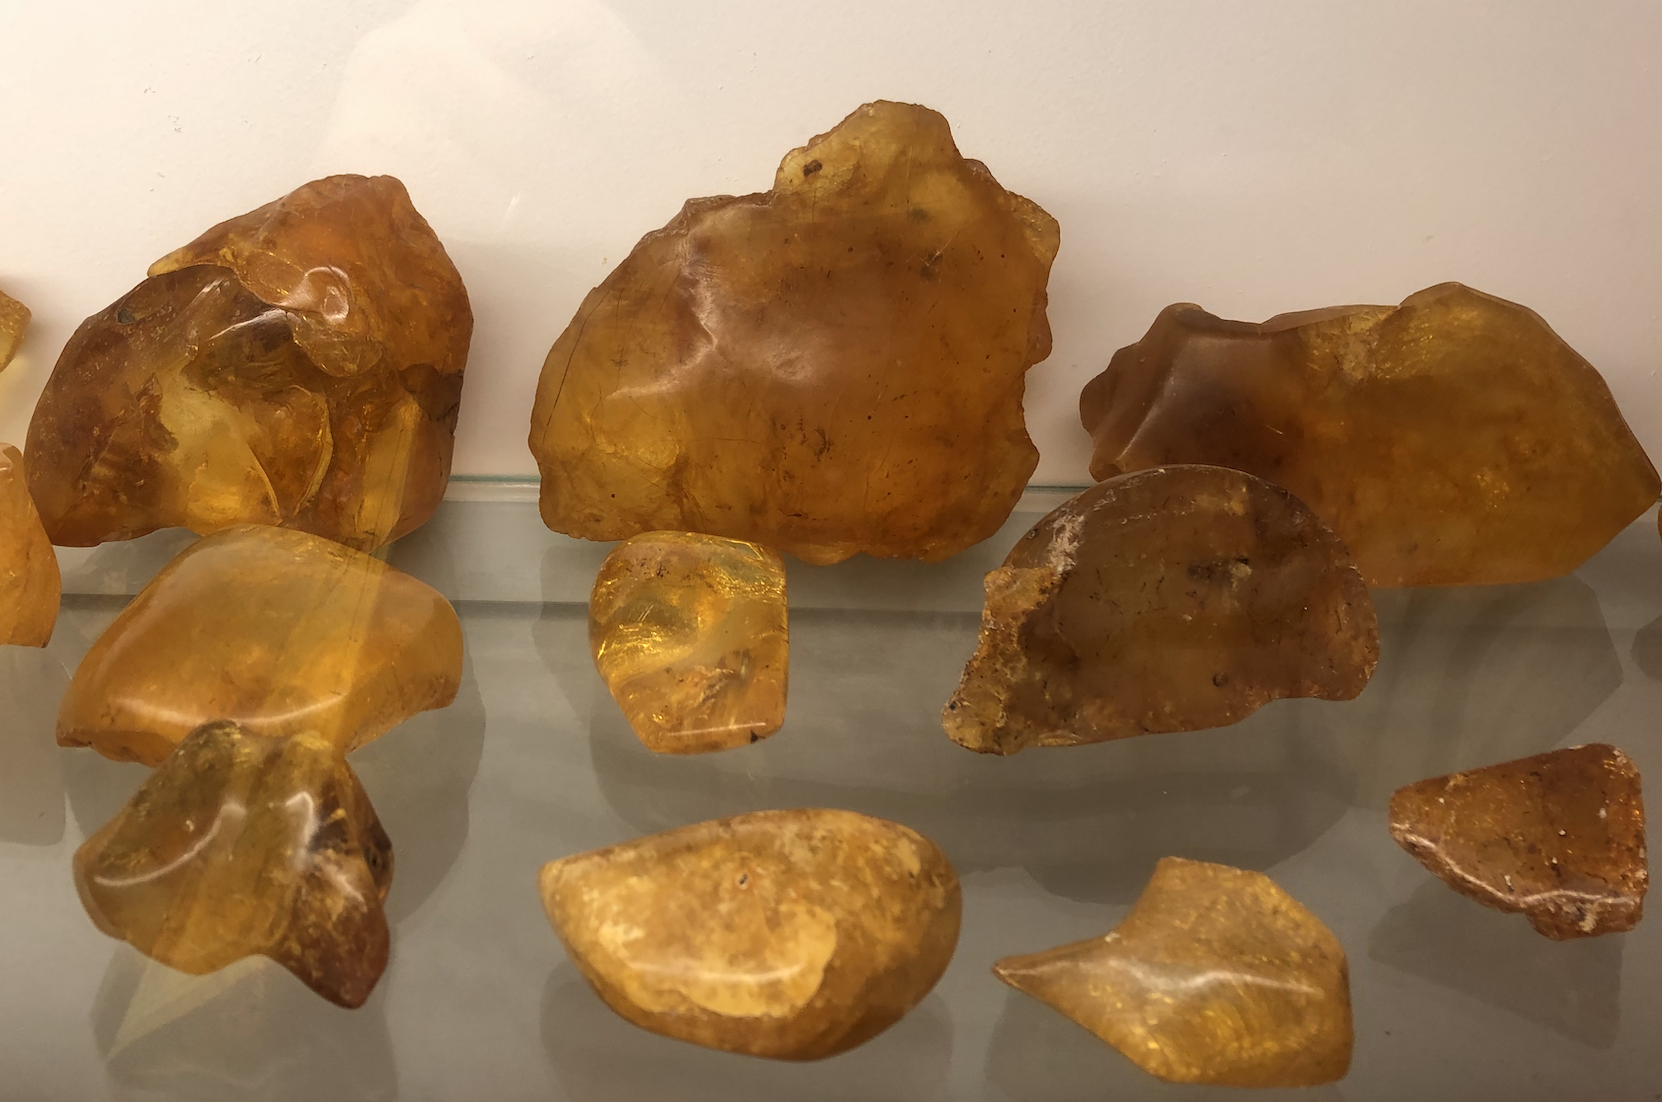  Polished pieces were used for decoration, as well as a substitute for amber in jewelry. 